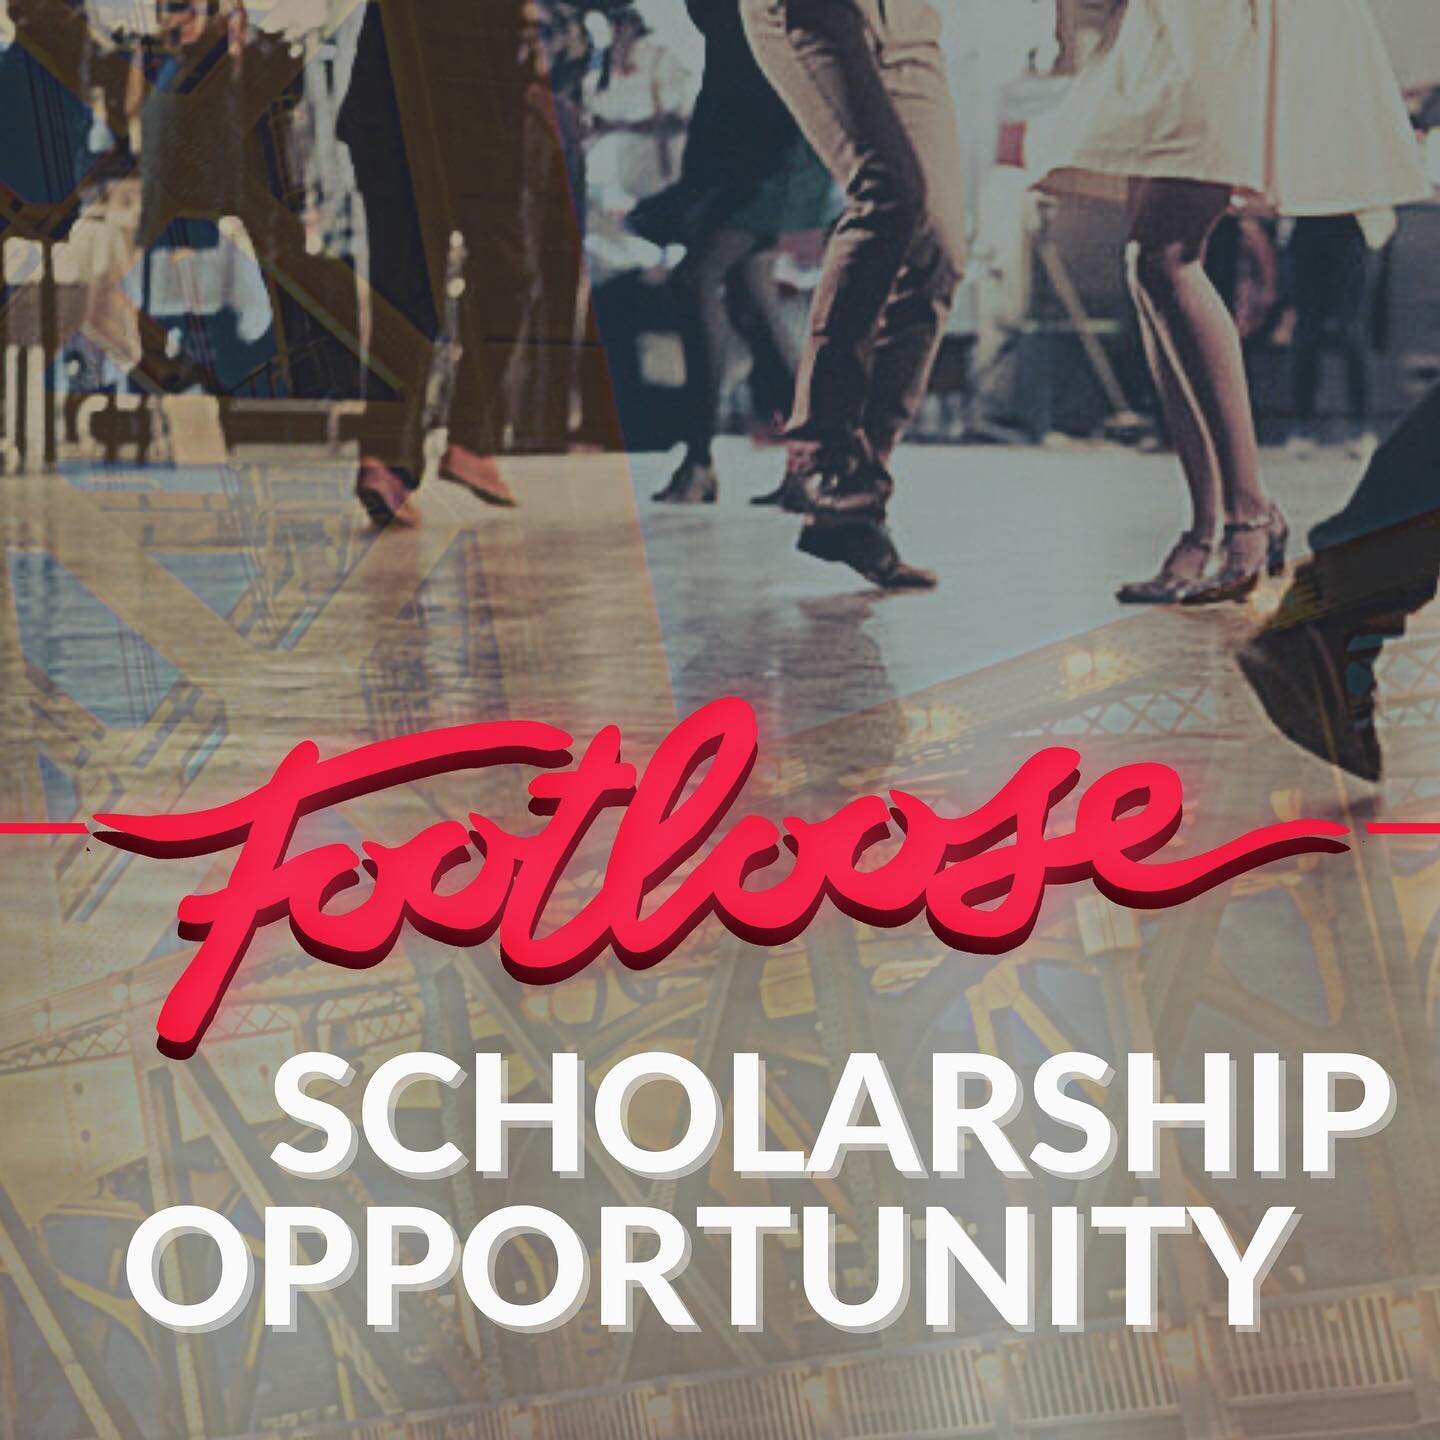 ✨FOOTLOOSE SCHOLARSHIP AUDITIONS ON SUNDAY✨

💚These are available for exceptional singers, actors and dancers aged 16-24, and can be accessed by attending a scholarship audition on Sunday 16th May 2021.

Sign up via: www.TheArtsCentreTelford.com/aud